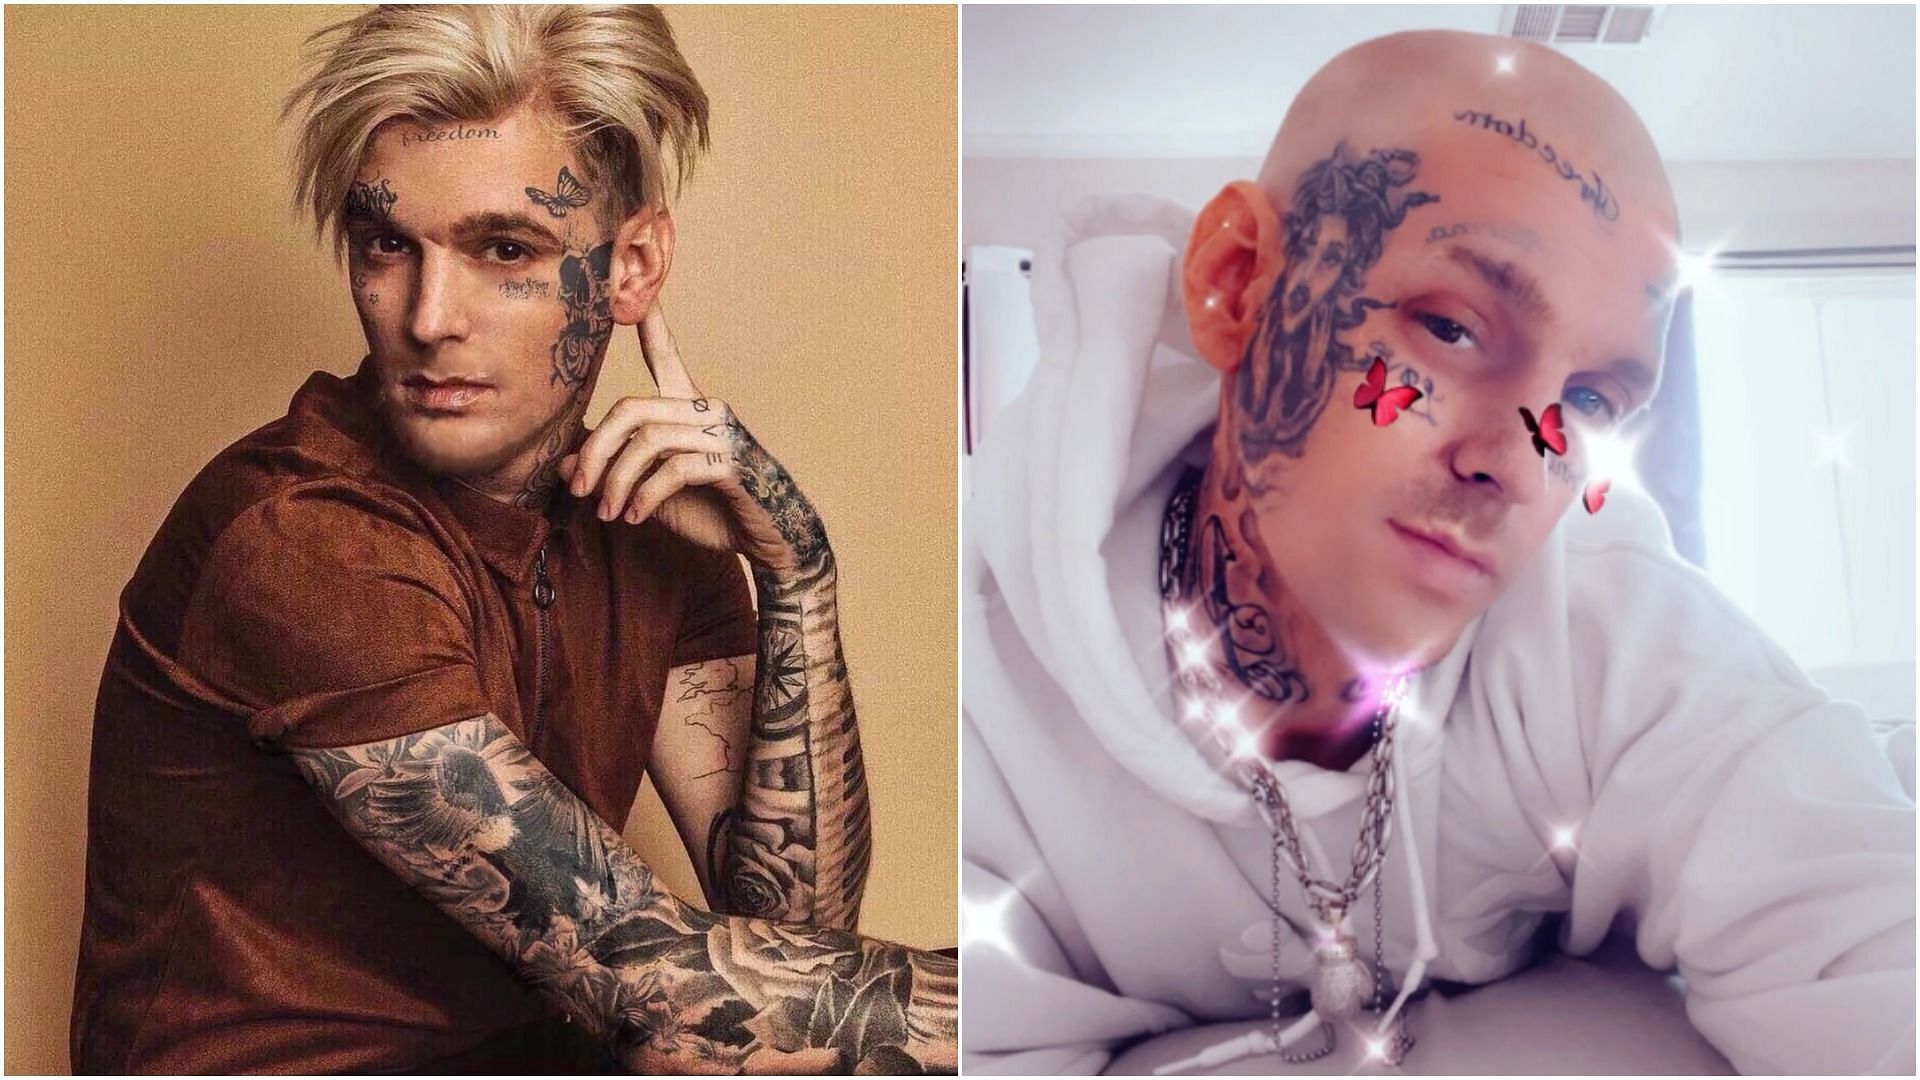 Aaron Carter Explains Why He Got Face Tattoos  Aaron Carter  Just Jared  Celebrity News and Gossip  Entertainment